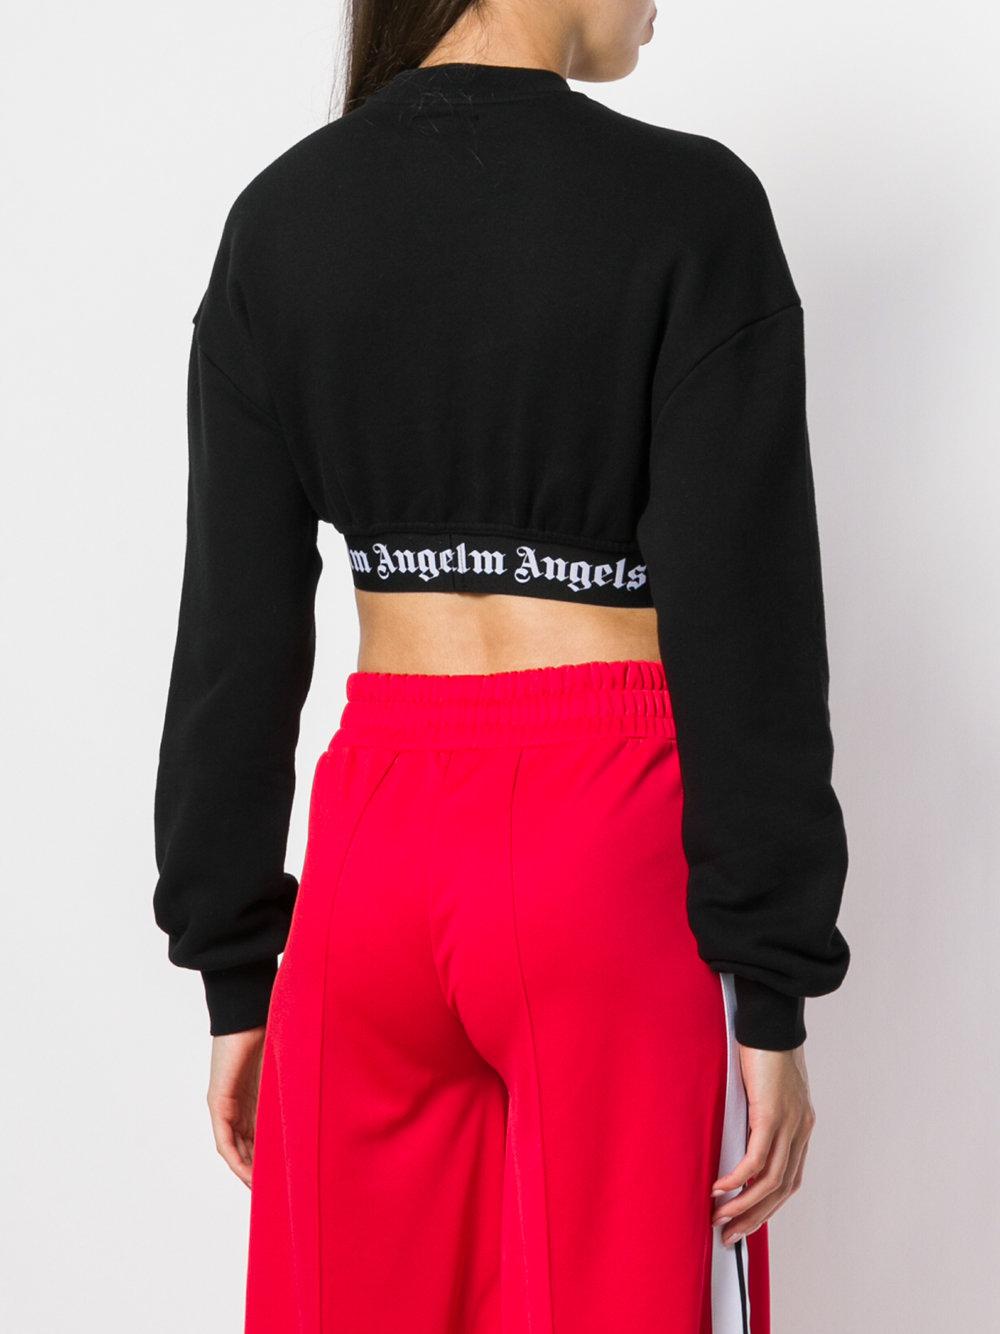 Palm Angels Cotton Cropped Sweater in Black - Lyst